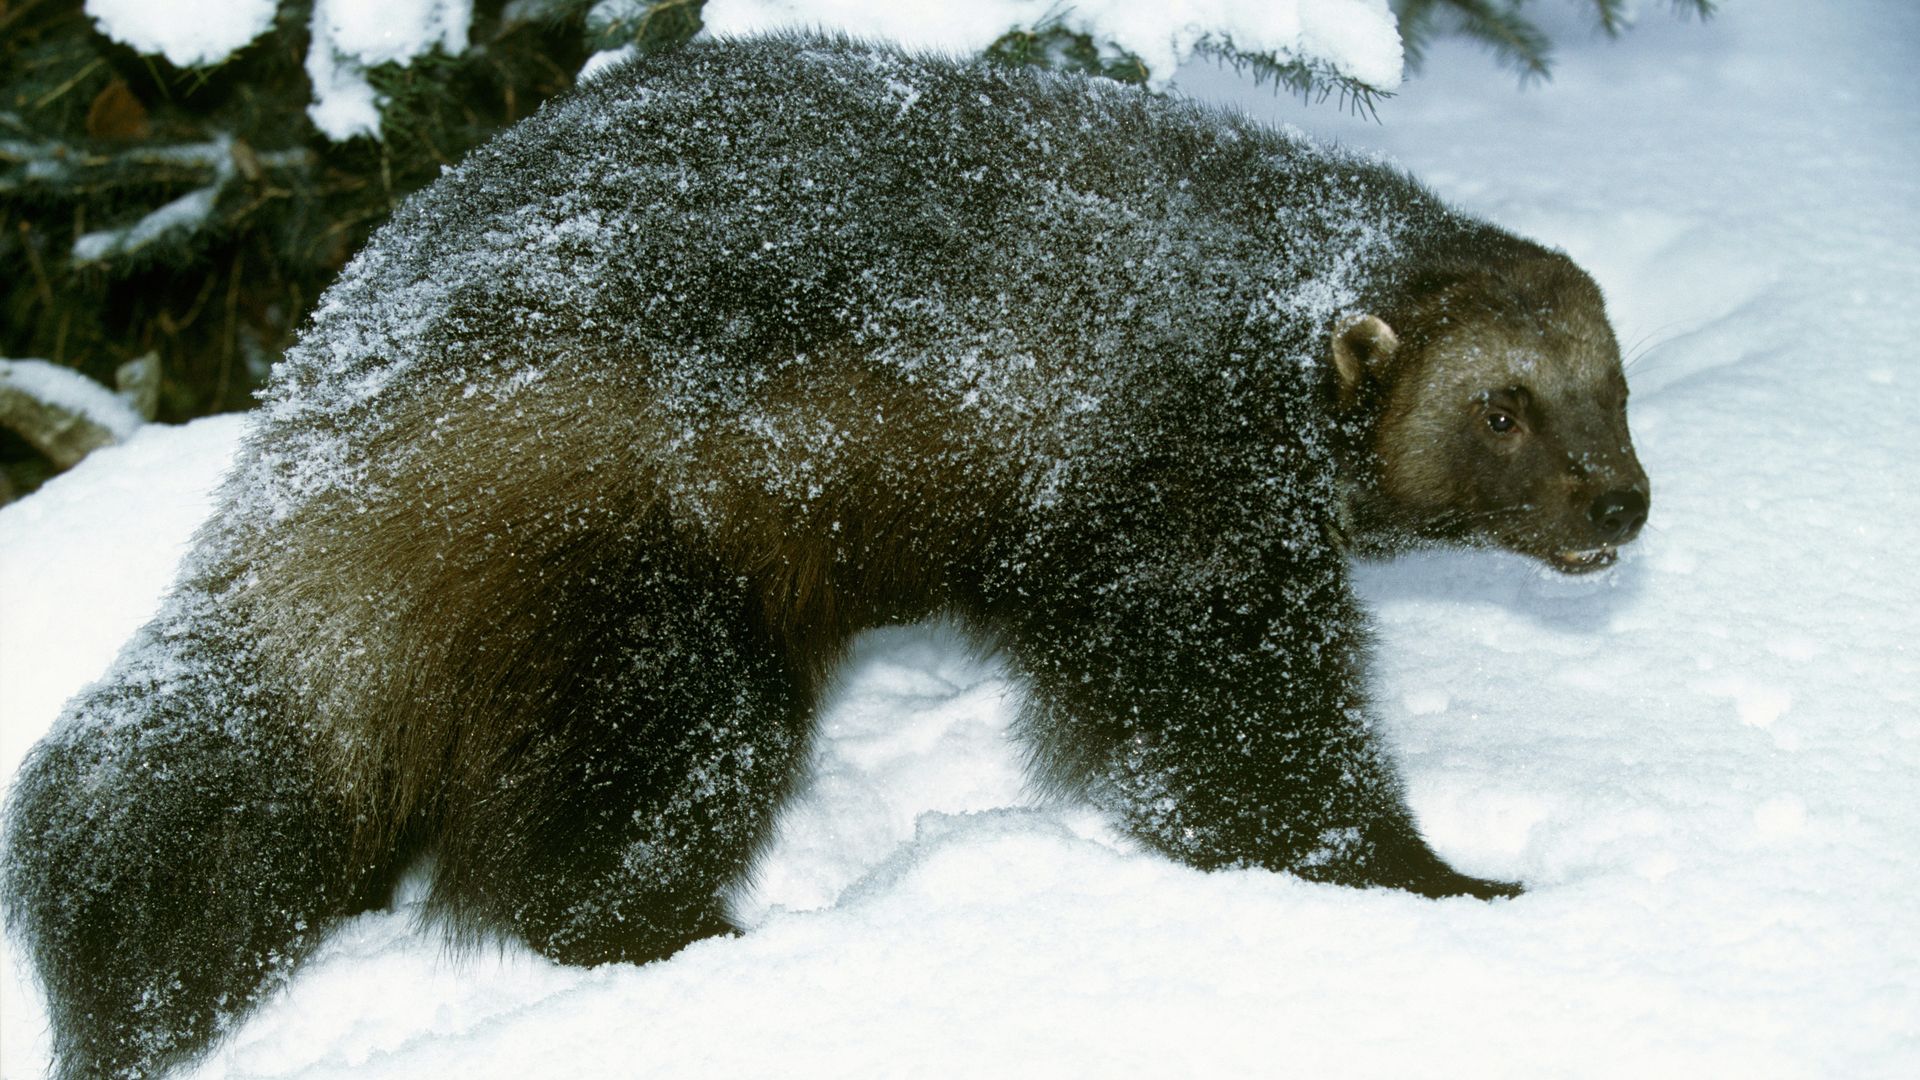 A wolverine, which is the largest member of the weasel family, in the snow. 